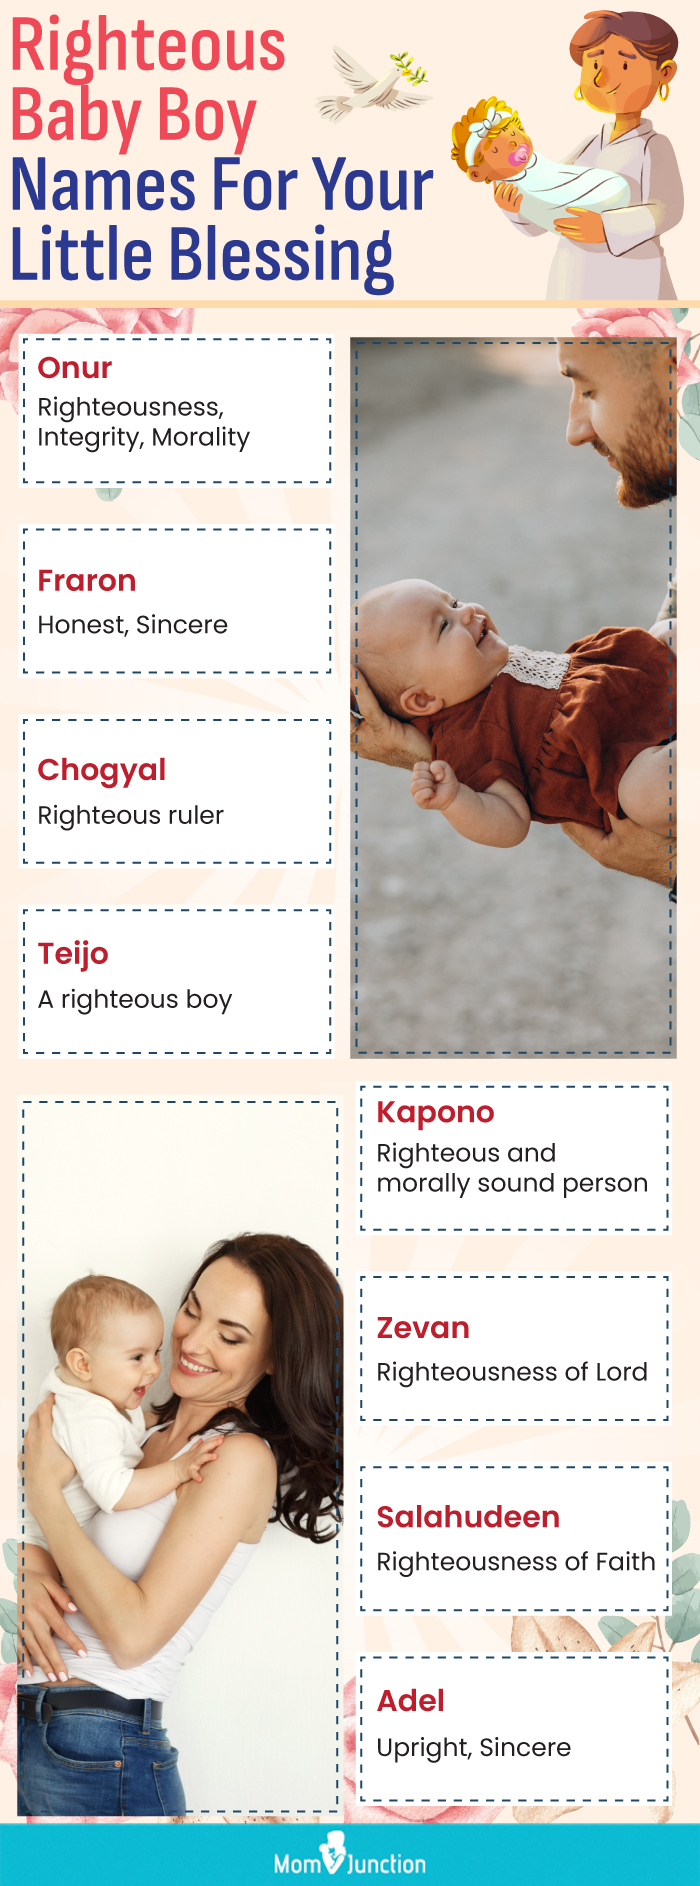 righteous baby boy names for your little blessing(infographic)